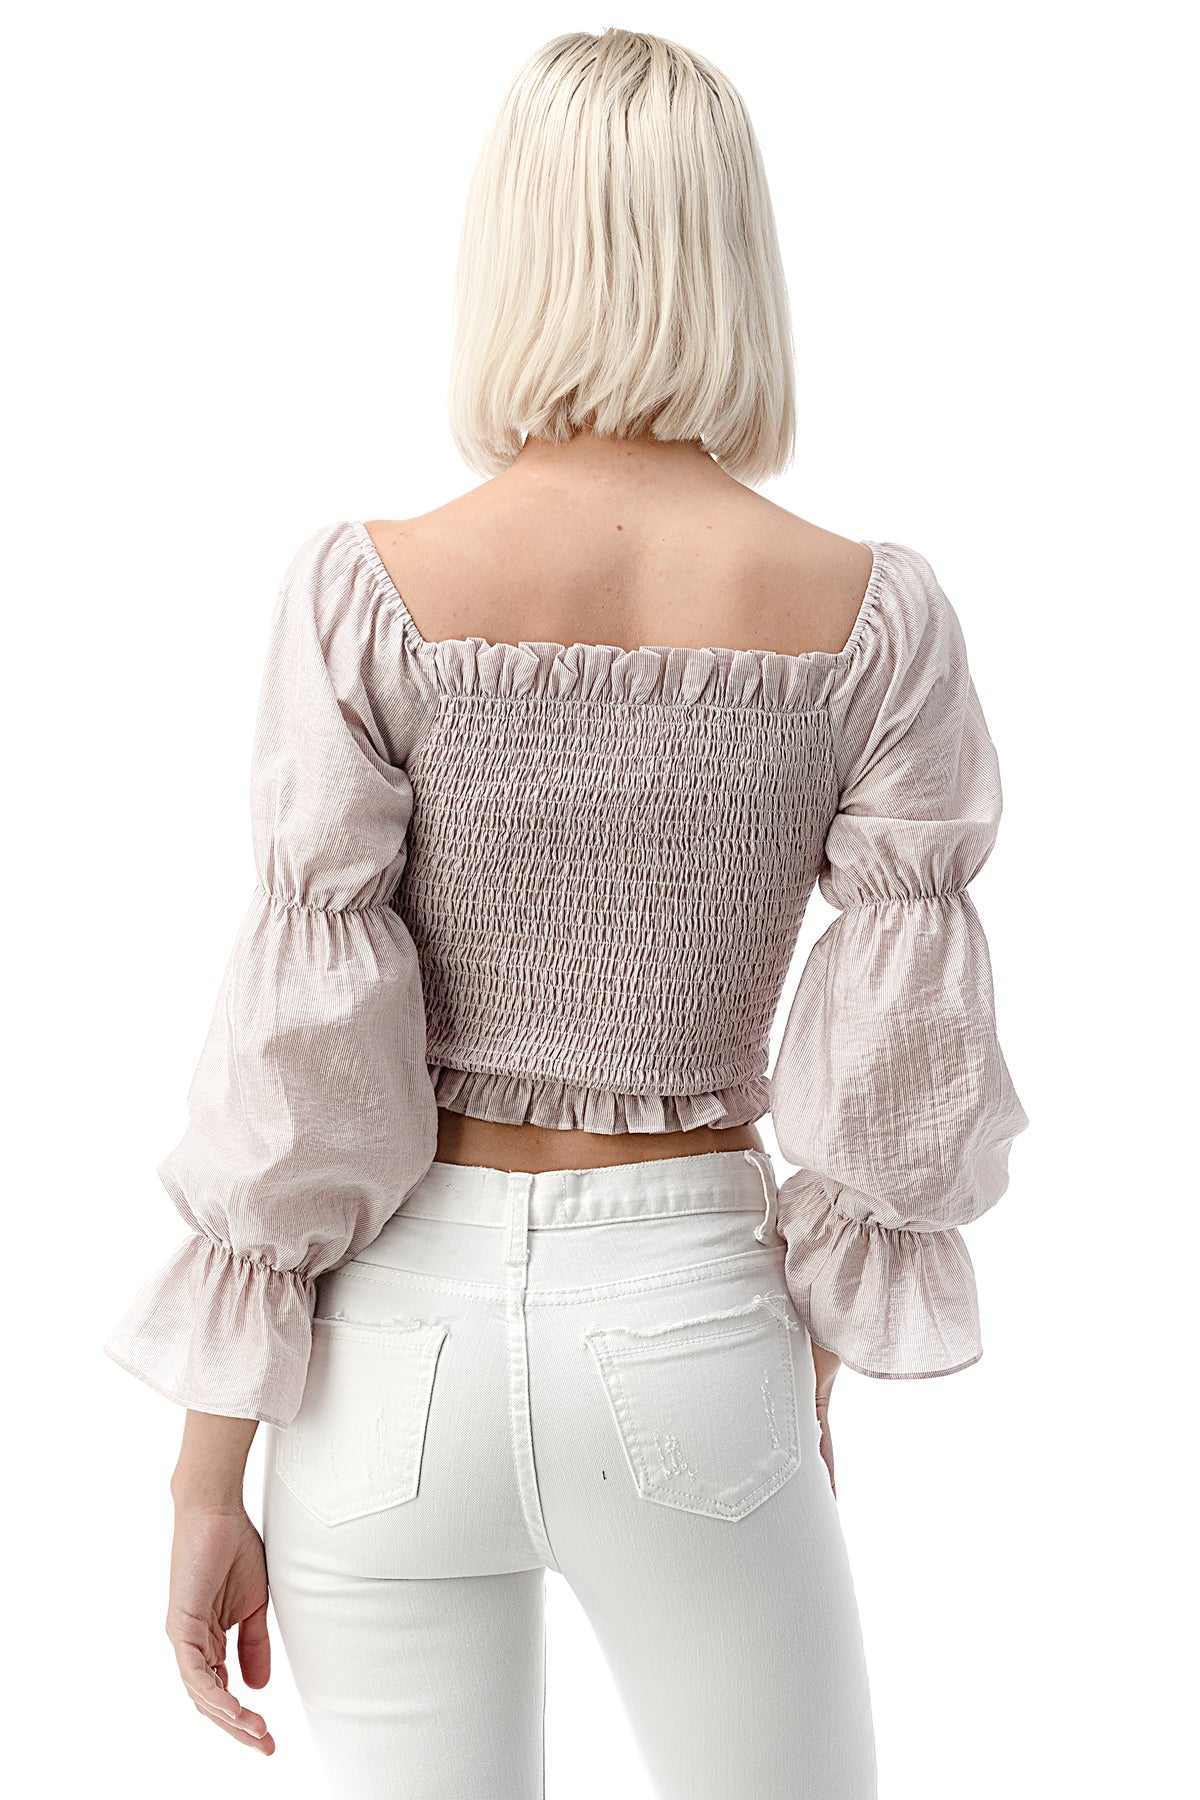 EDGY Land Girl's and Women's Ruffled Square Neck Circular Flounce Sleeve Smocked Body Fashion Blouse